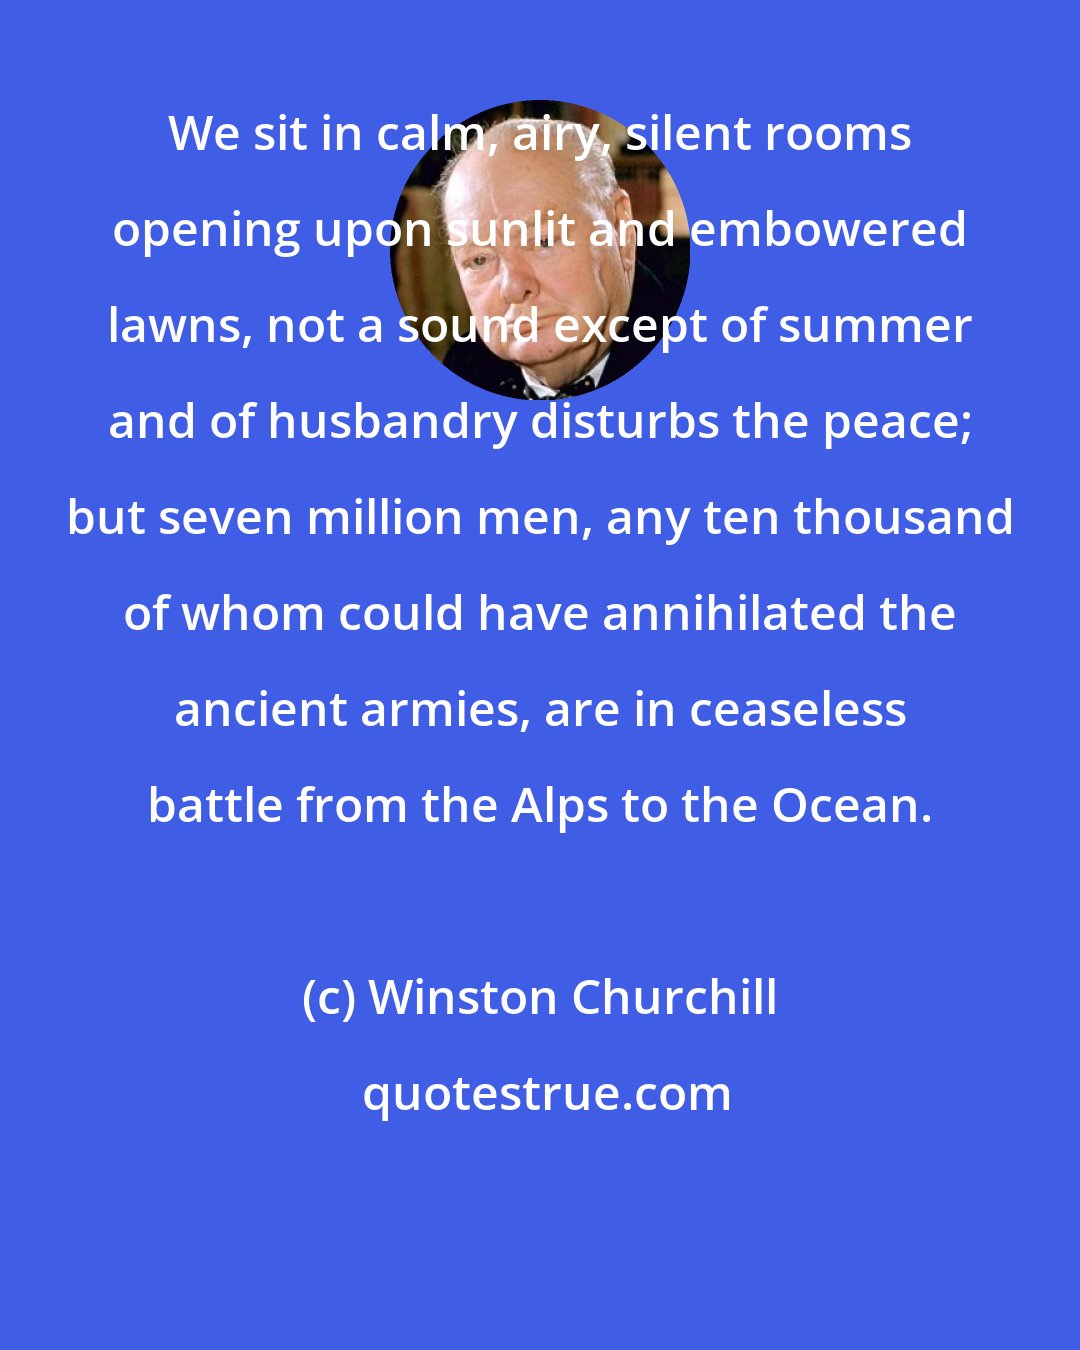 Winston Churchill: We sit in calm, airy, silent rooms opening upon sunlit and embowered lawns, not a sound except of summer and of husbandry disturbs the peace; but seven million men, any ten thousand of whom could have annihilated the ancient armies, are in ceaseless battle from the Alps to the Ocean.